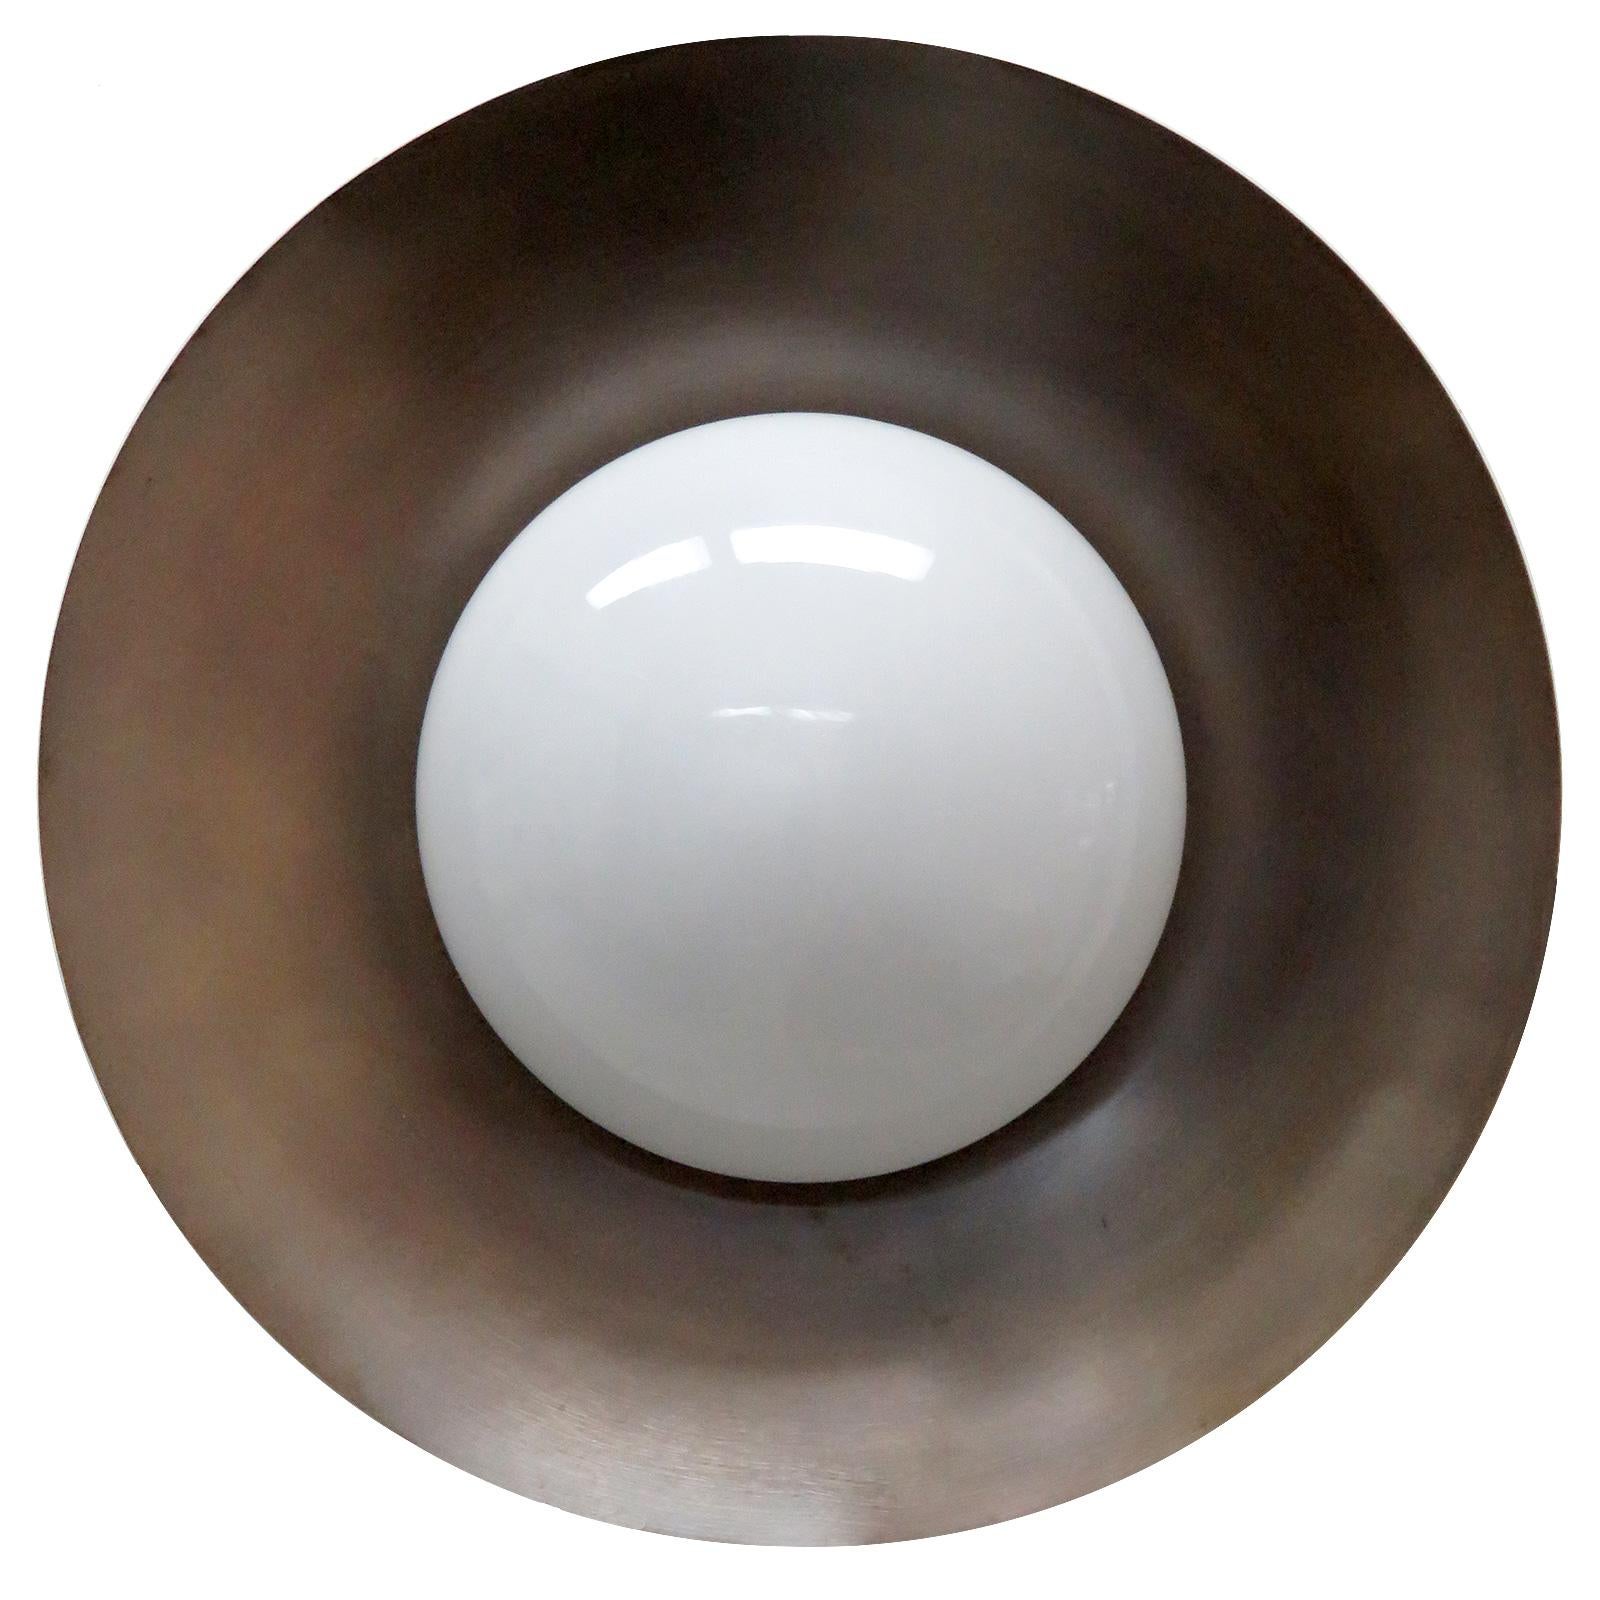 Ceiling Light "Iowa" by Gallery L7